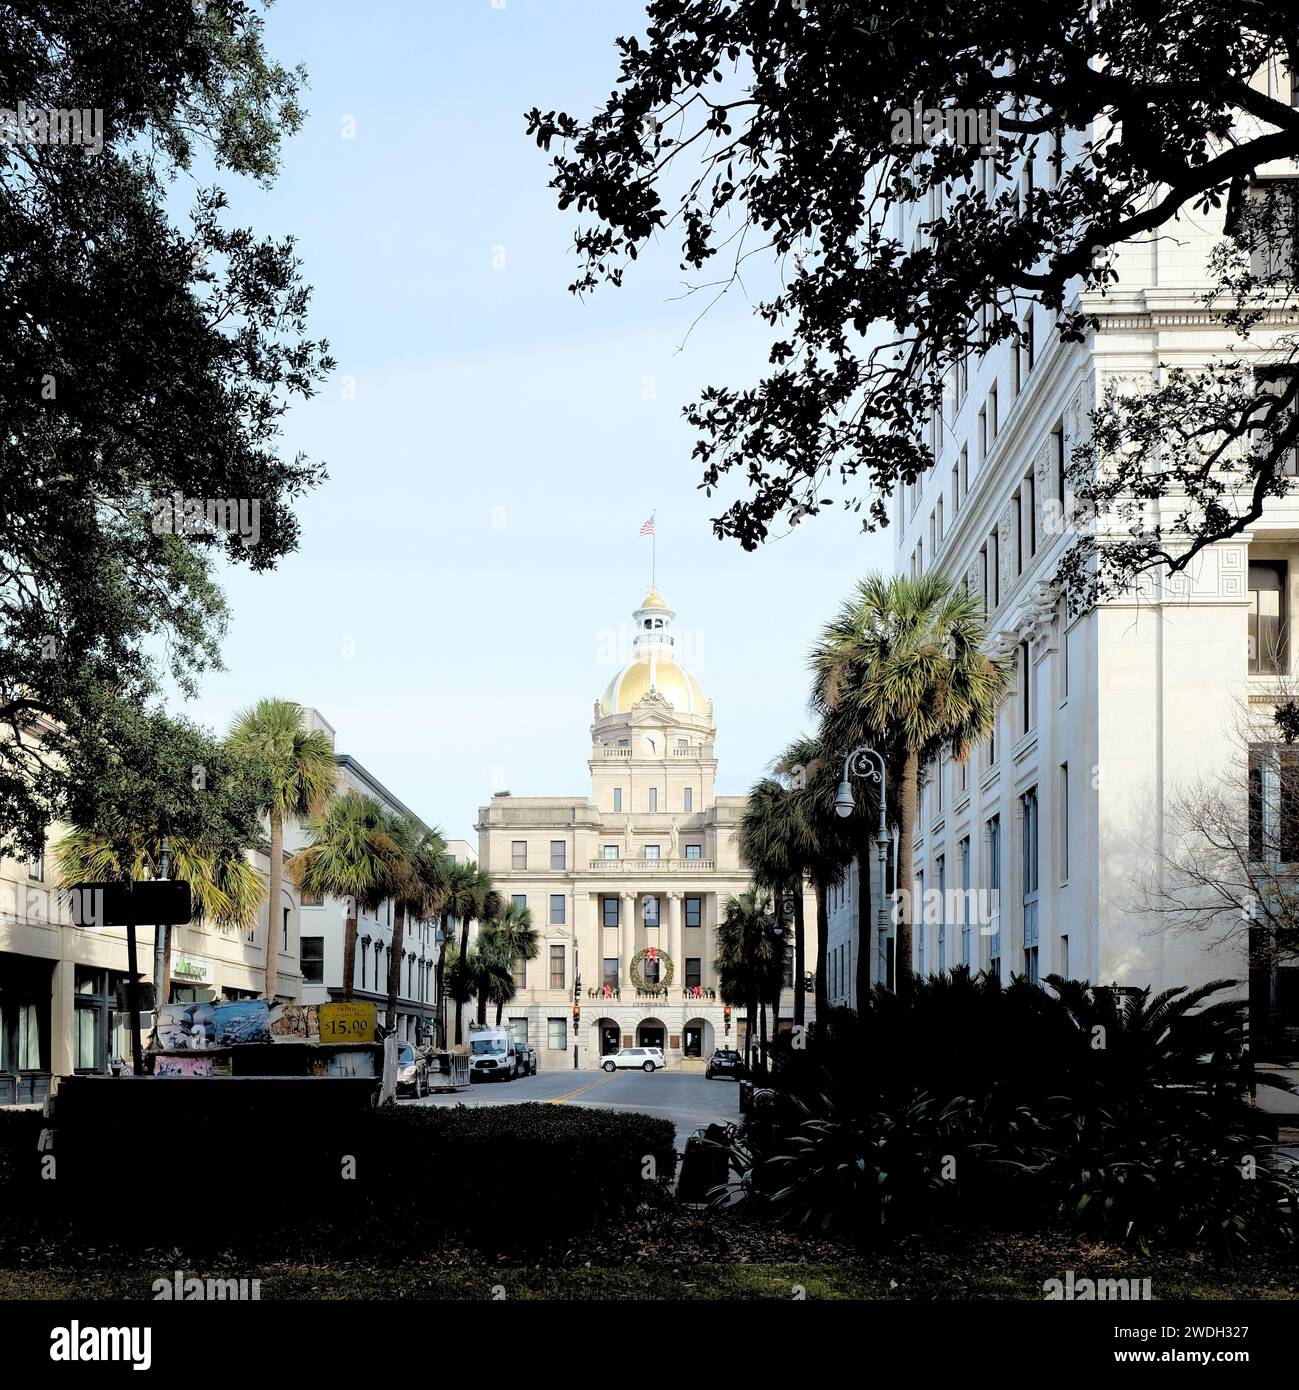 Historic Savannah, Georgia City Hall, designed by architect Hyman Witcover; clock tower, golden dome, US flag; opened in 1906. Stock Photo